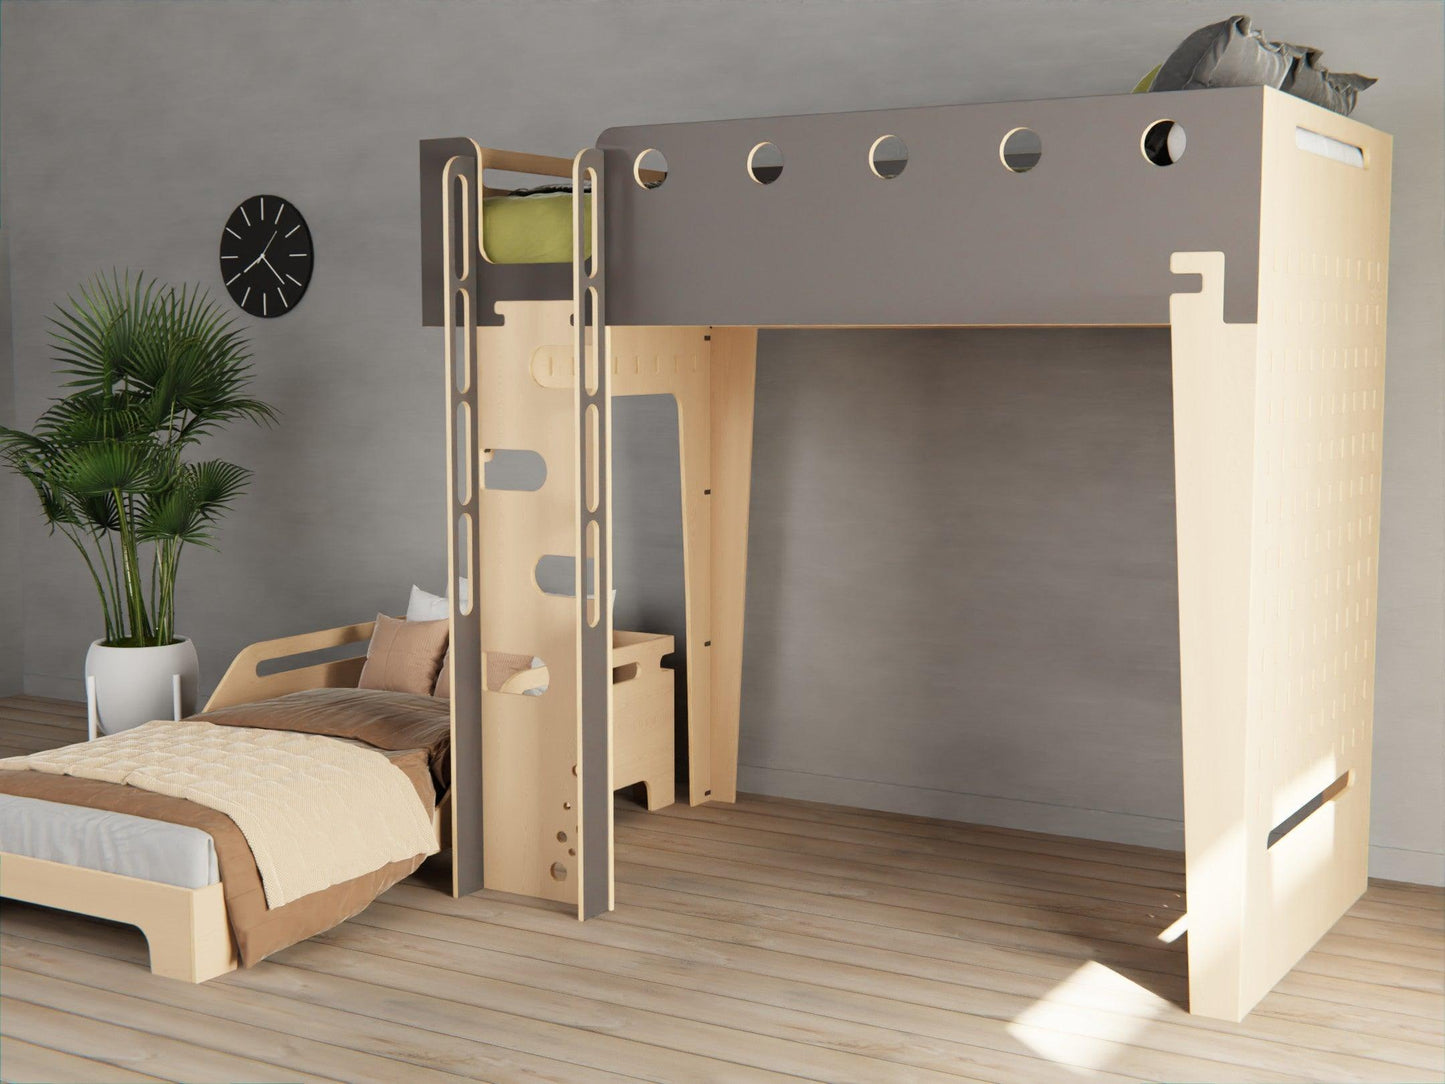 Creating an efficient space: our black  plywood loft bed integrates a study desk.